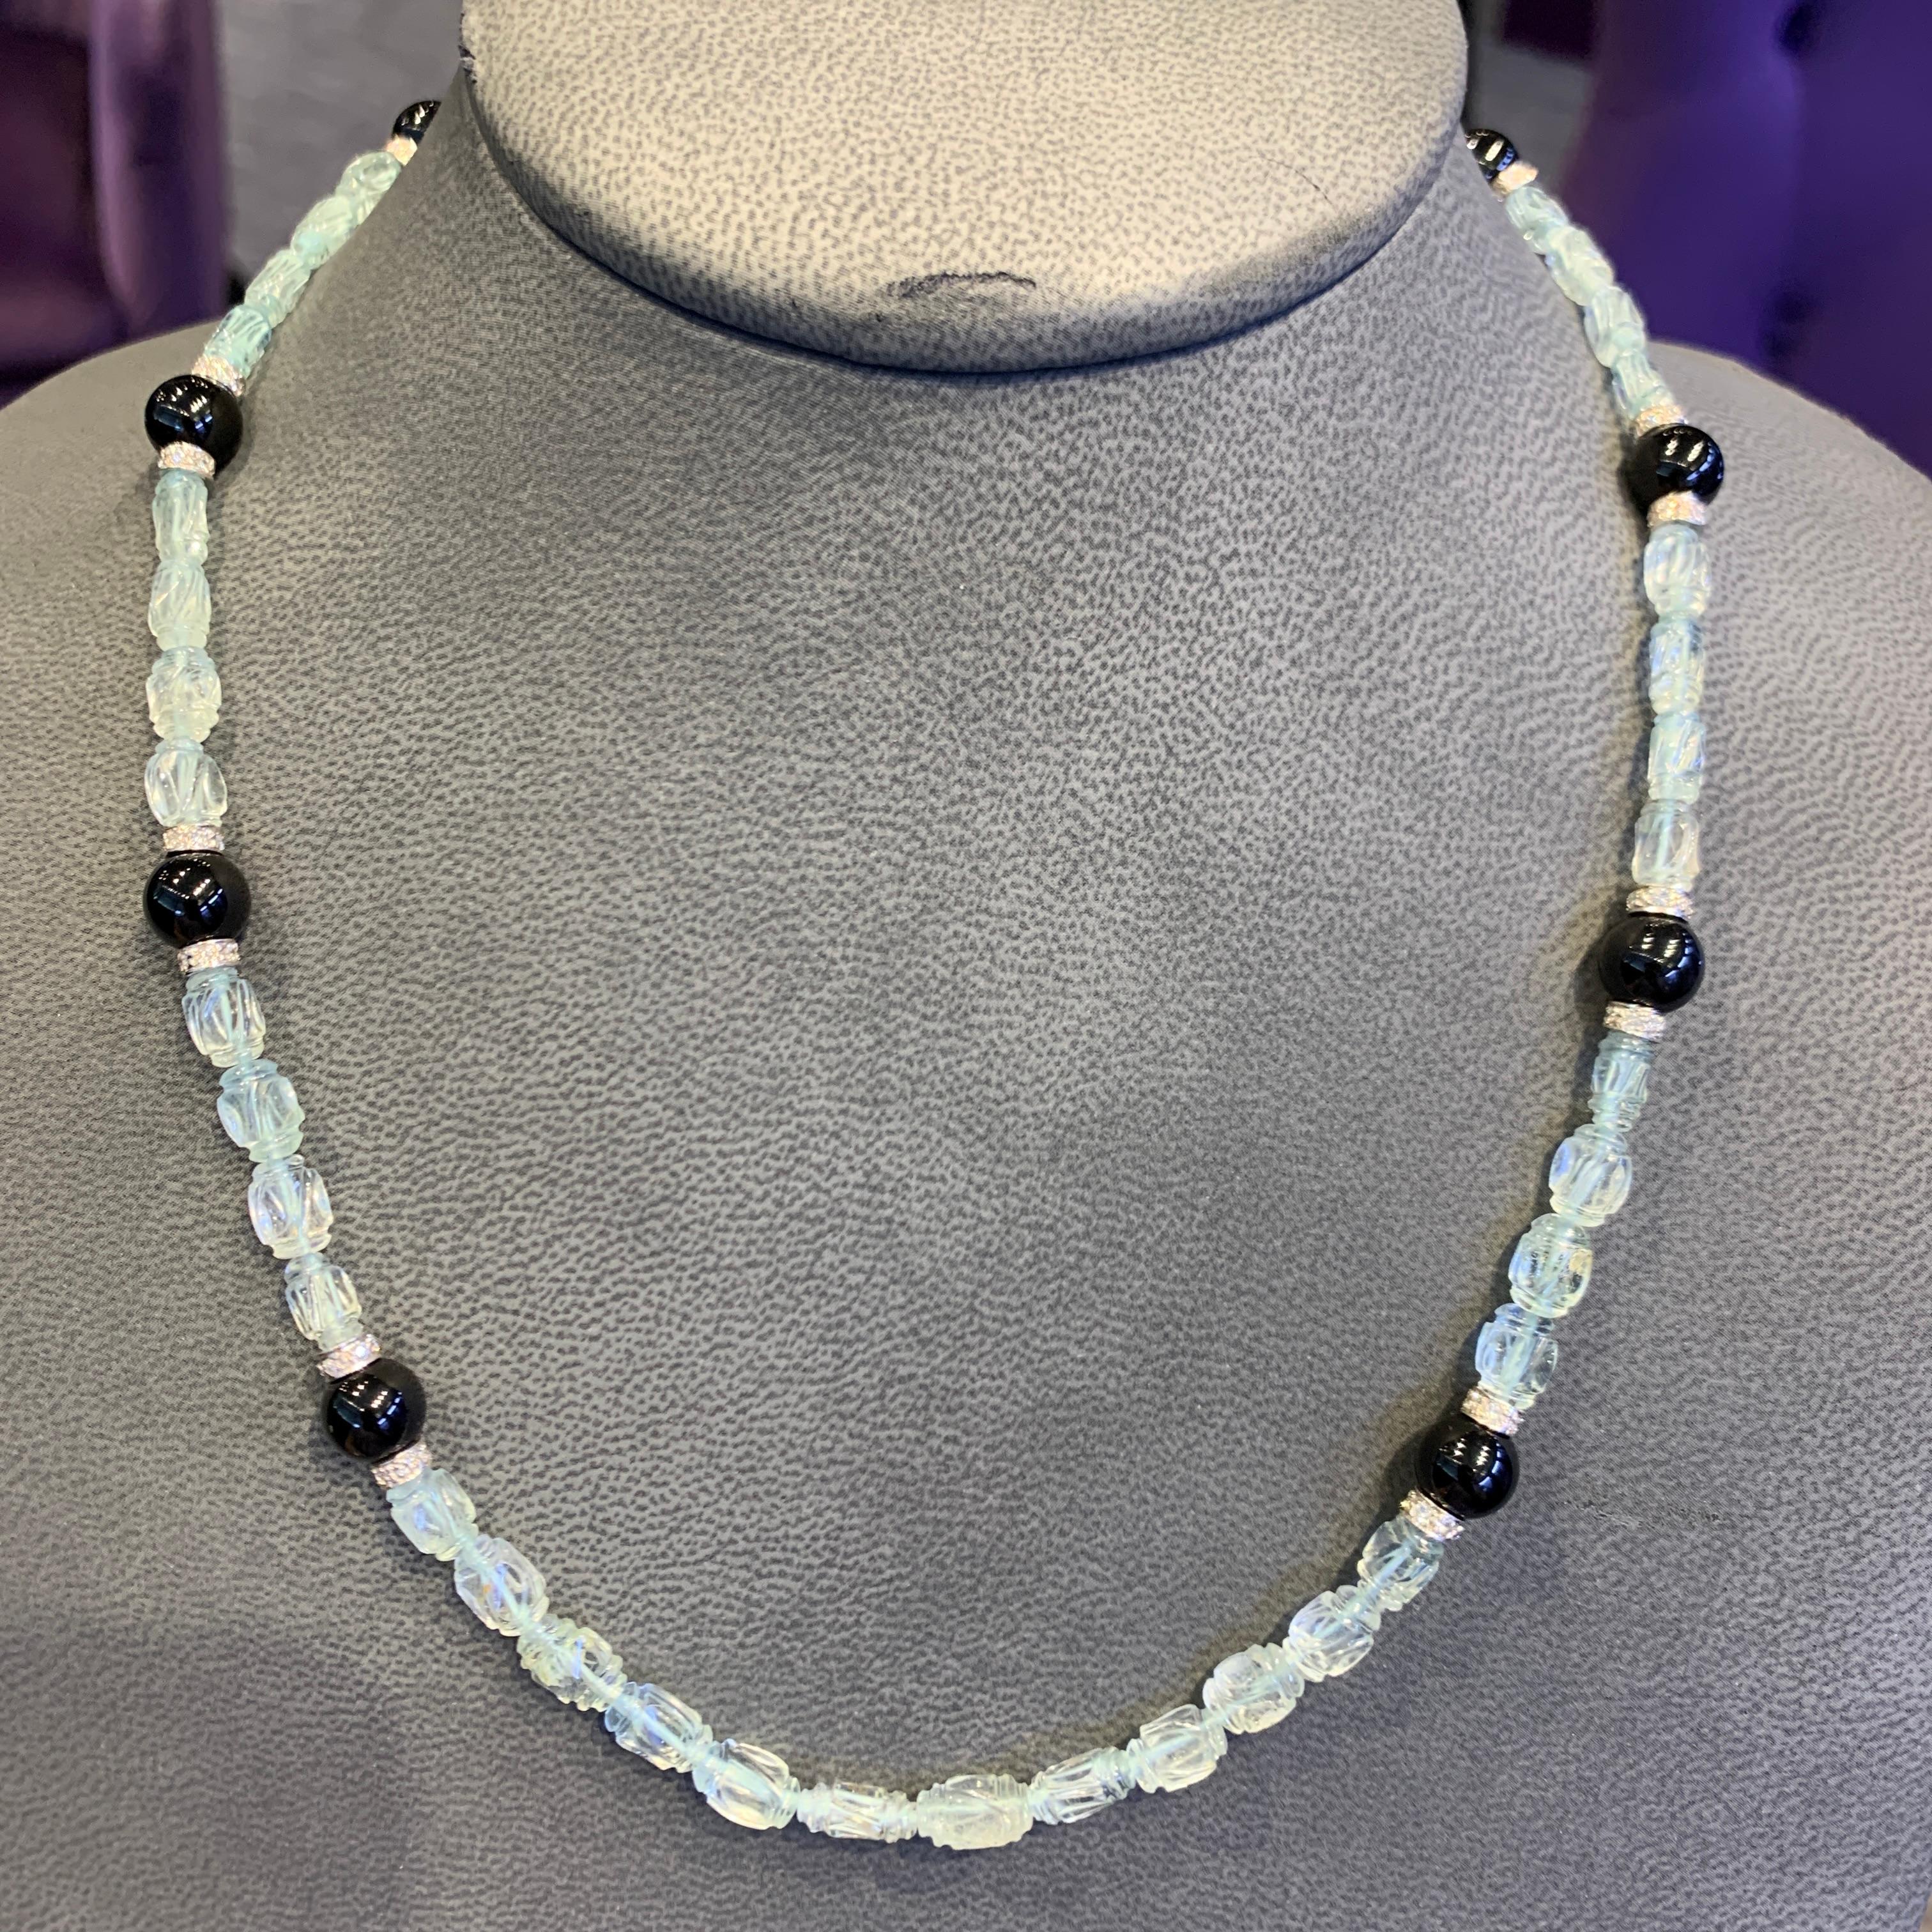 Carved Aquamarine & Onyx Bead Necklace 

A necklace made of carved aquamarine beads and onyx beads, with 14 karat white gold spacers and clasp set with round cut diamonds

Length: 20